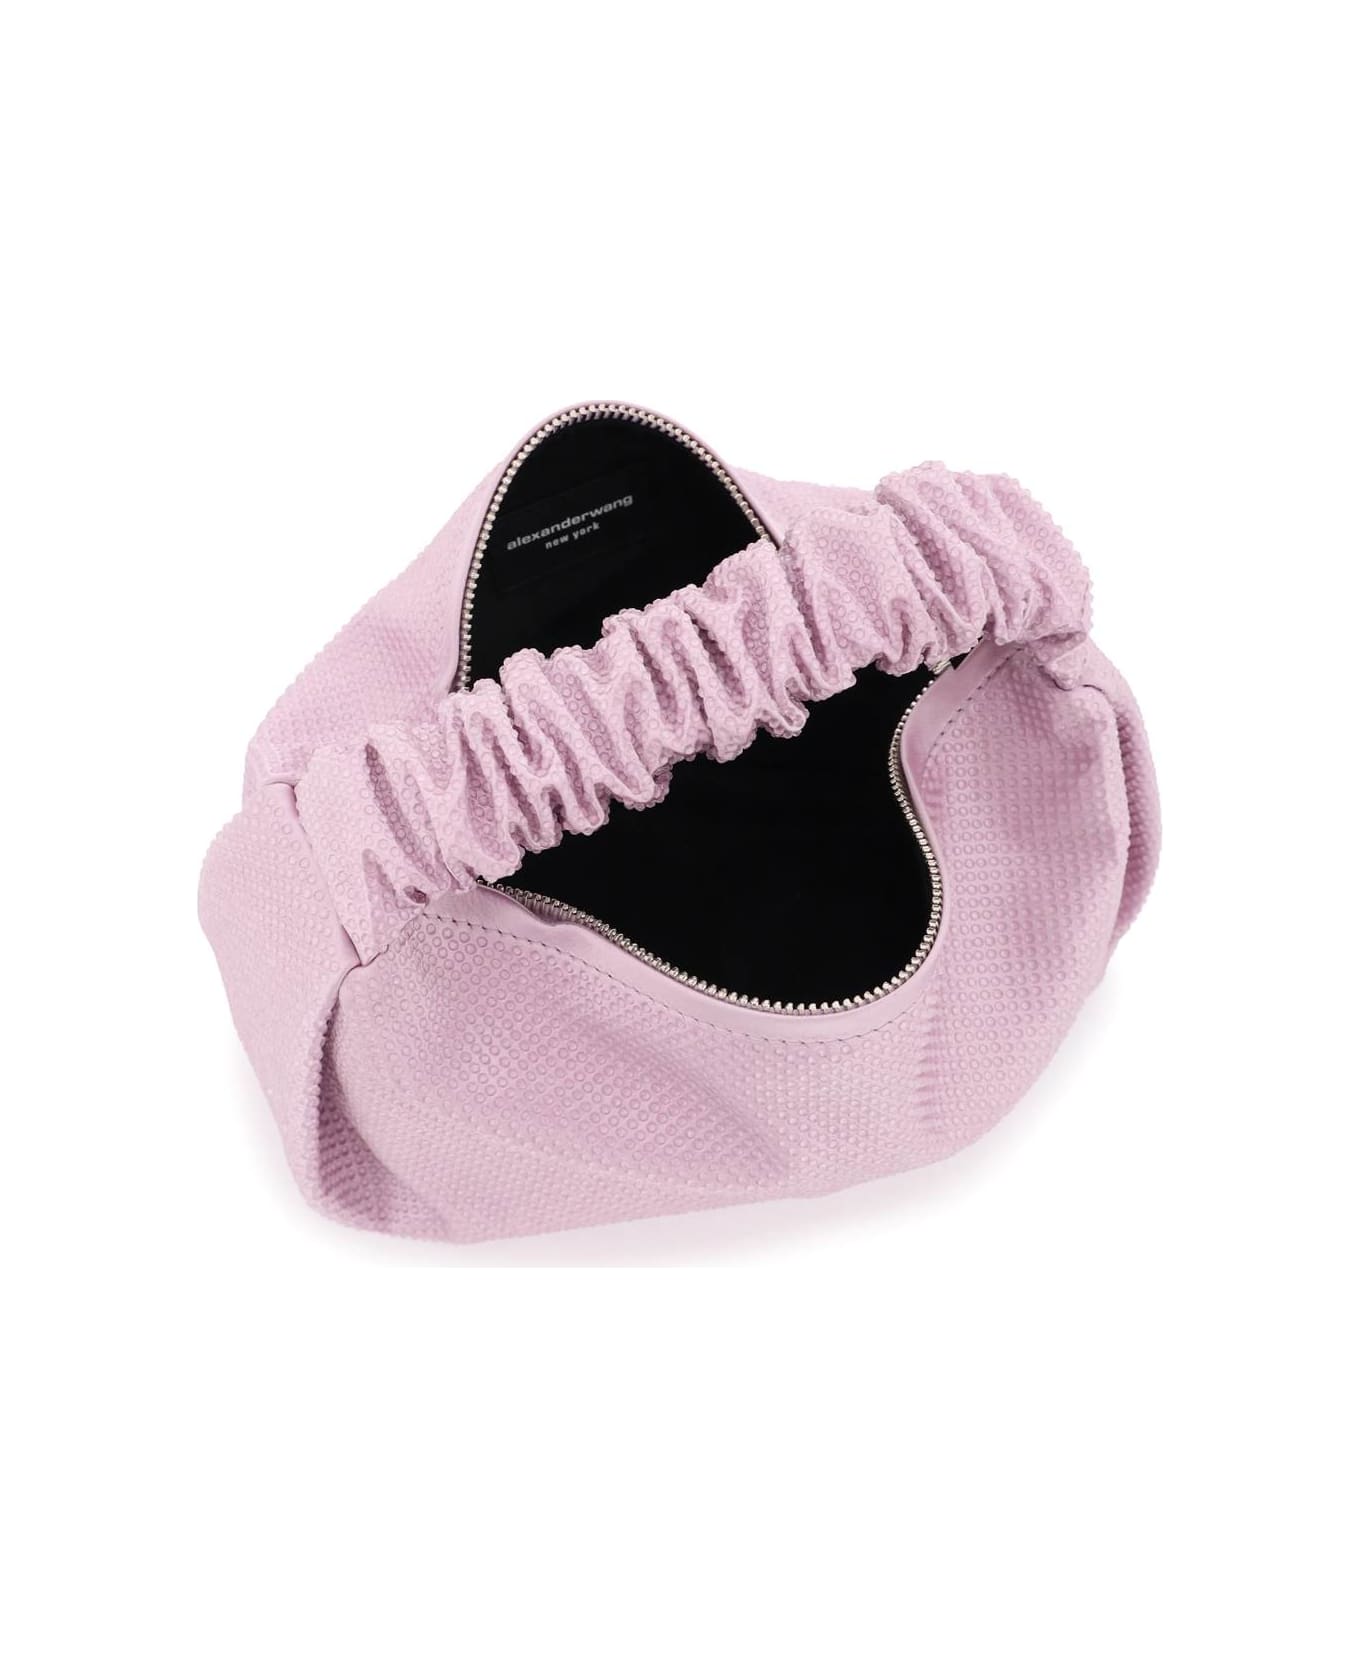 Alexander Wang Scrunchie Mini Bag With Crystals - Windsome Orchid